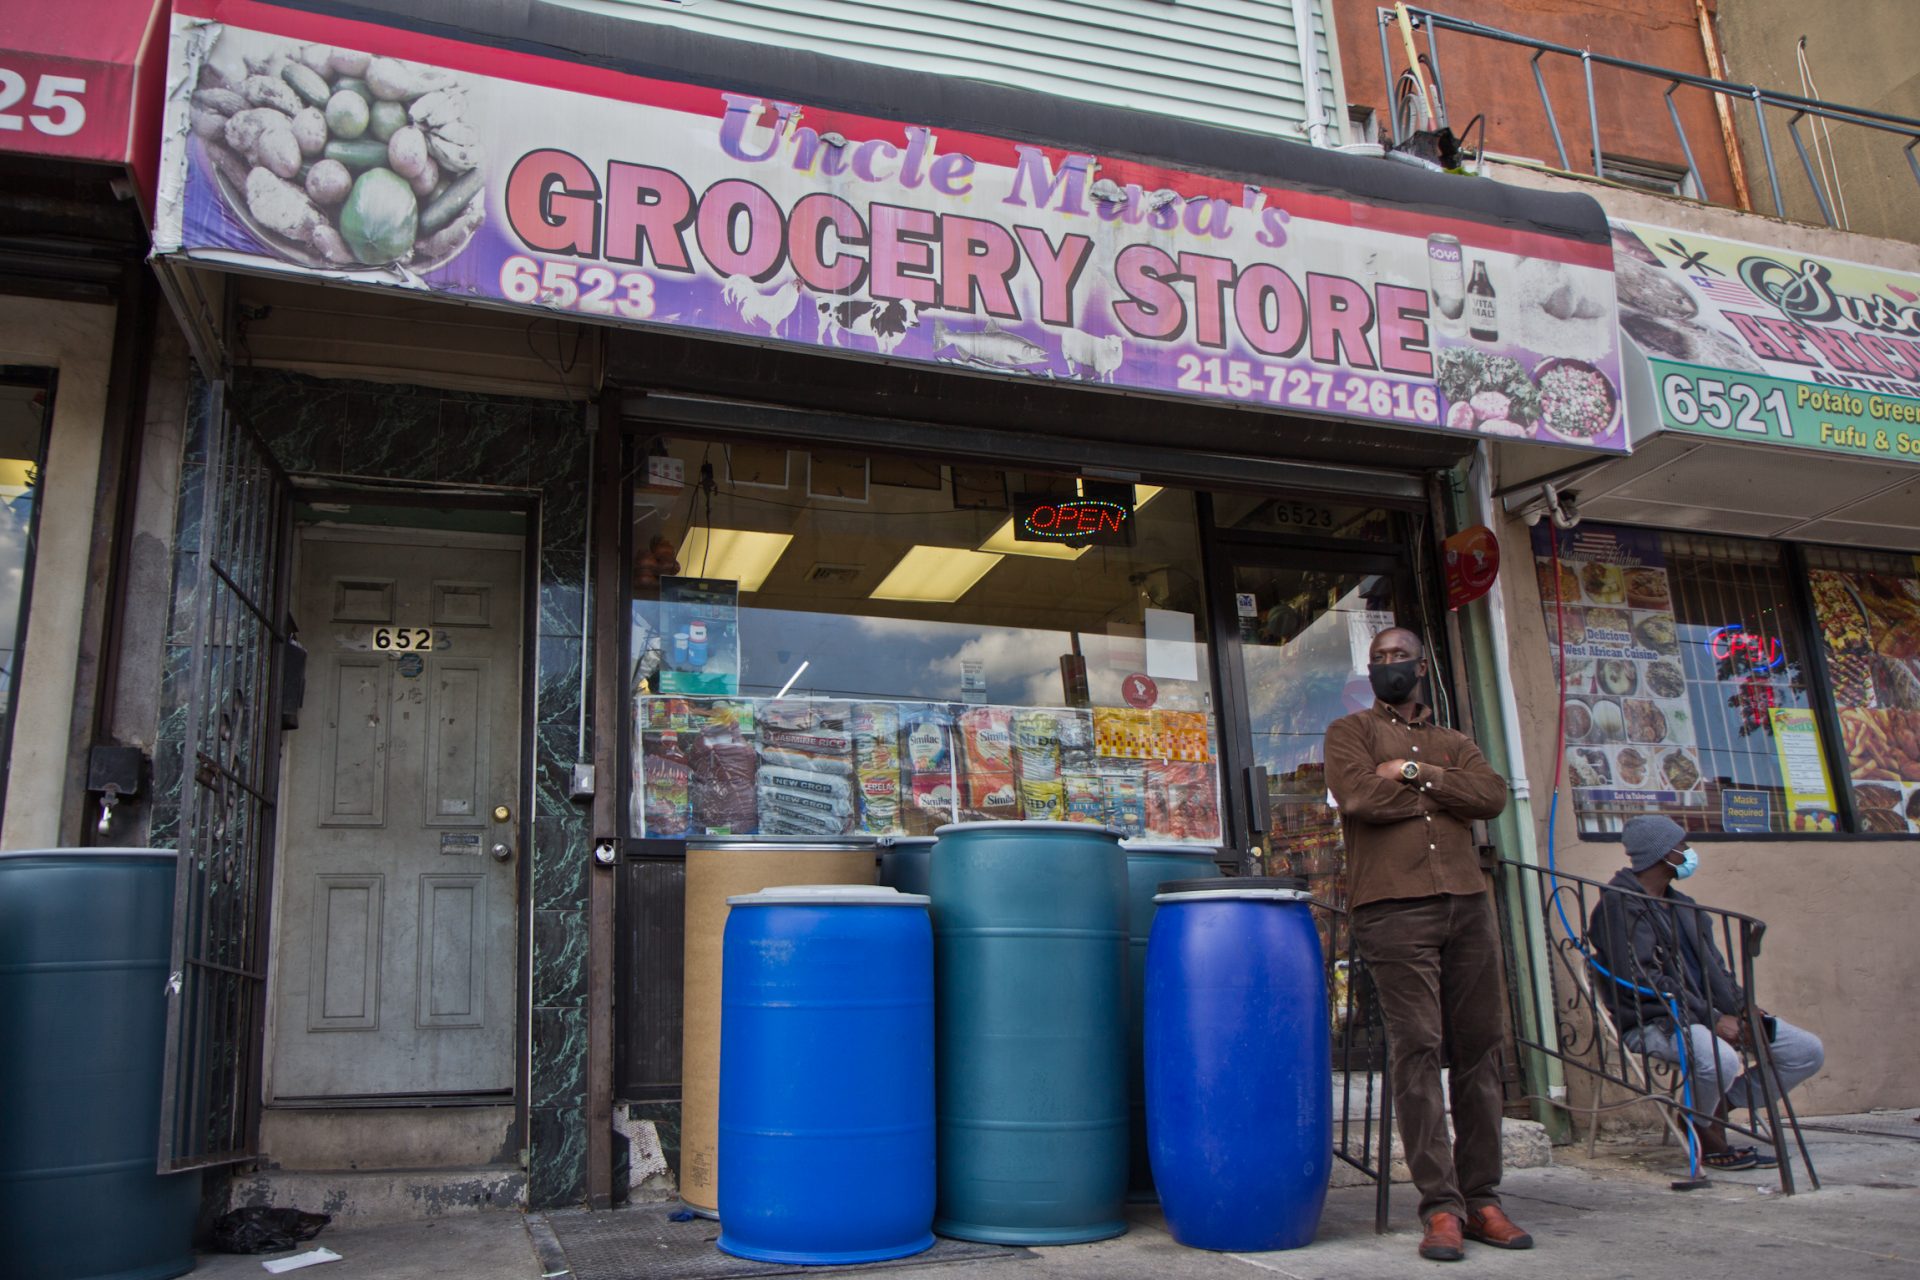 Musa Barry, owner of Uncle Musa’s Grocery, outside his store in Southwest Philadelphia.